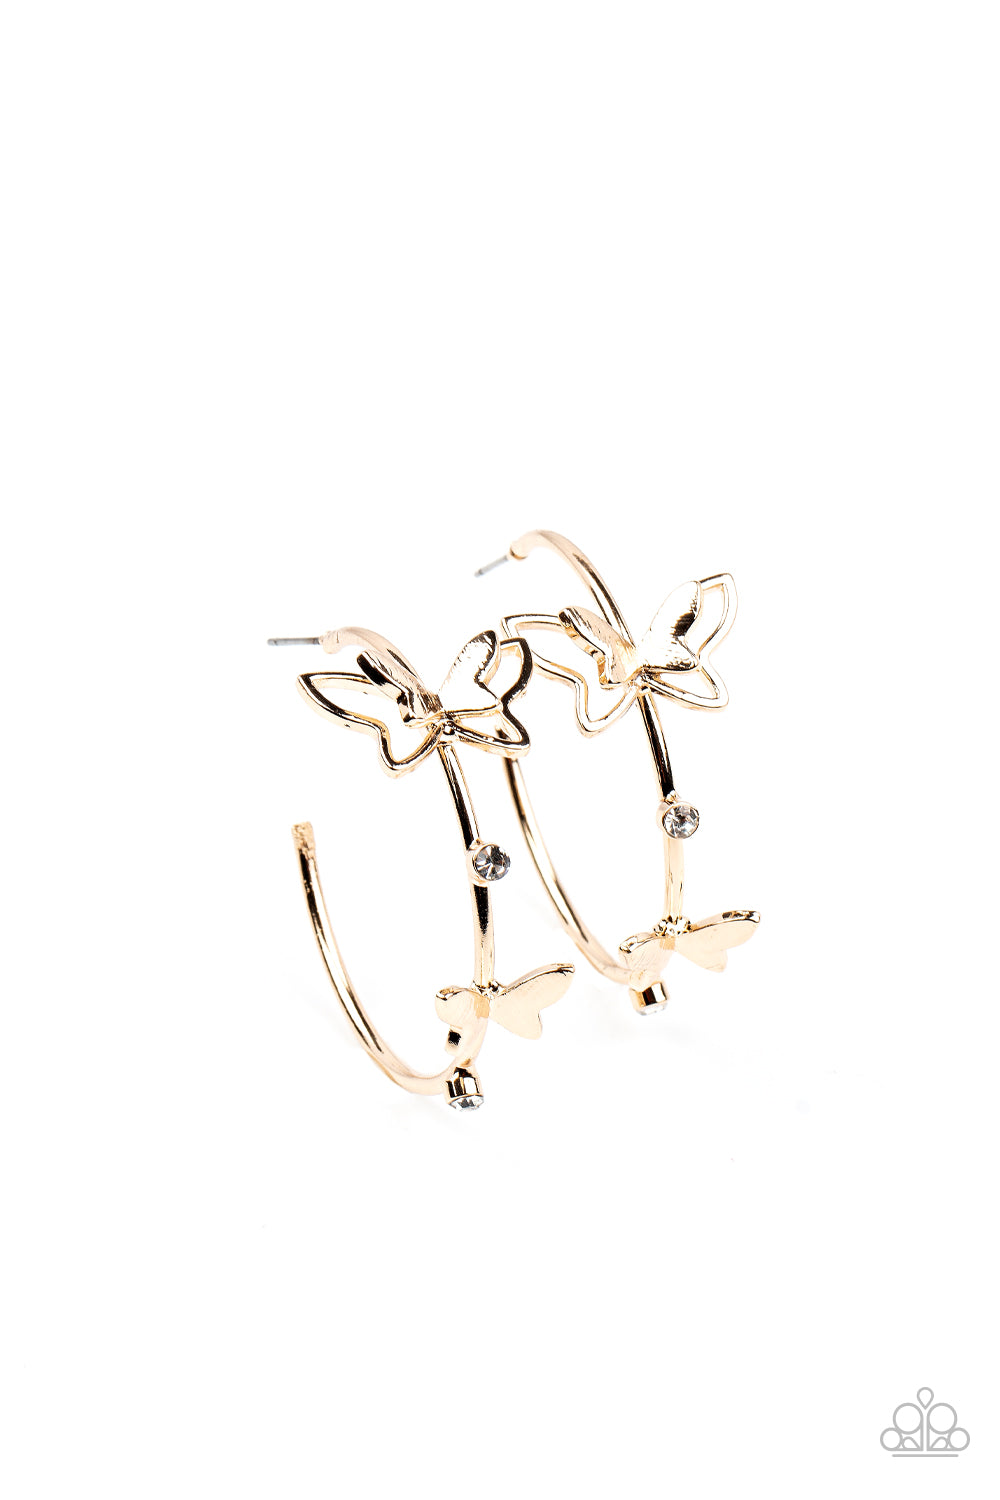 Paparazzi Accessories - Full Out Flutter #E614 - Gold Earrings